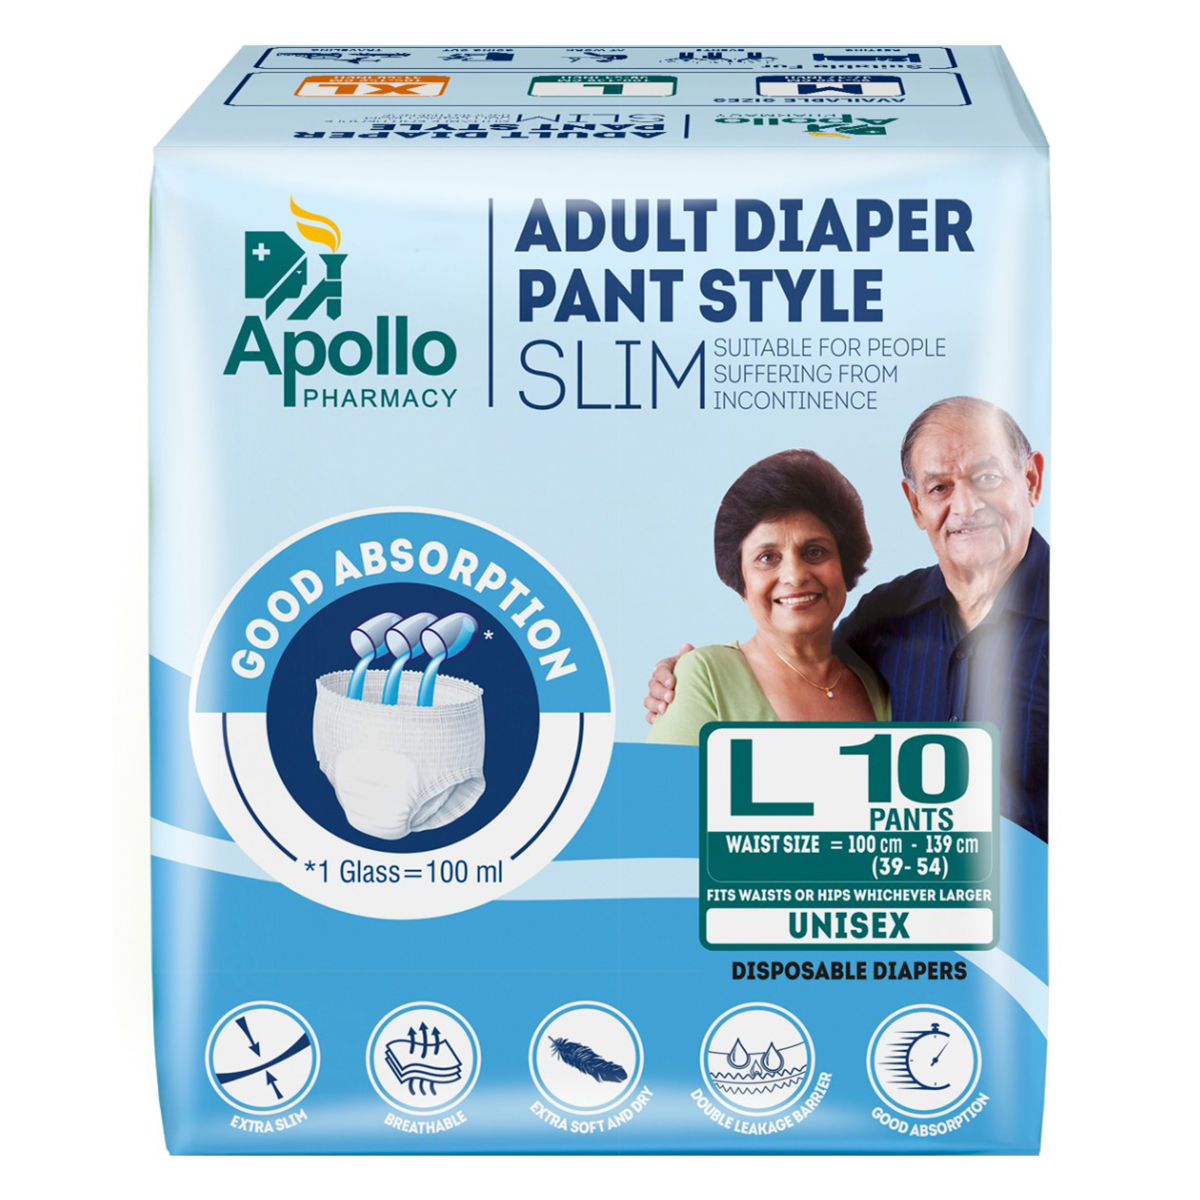 Apollo Pharmacy Adult Diaper Pant Style Slim Large, 10 Count Price, Uses,  Side Effects, Composition - Apollo Pharmacy